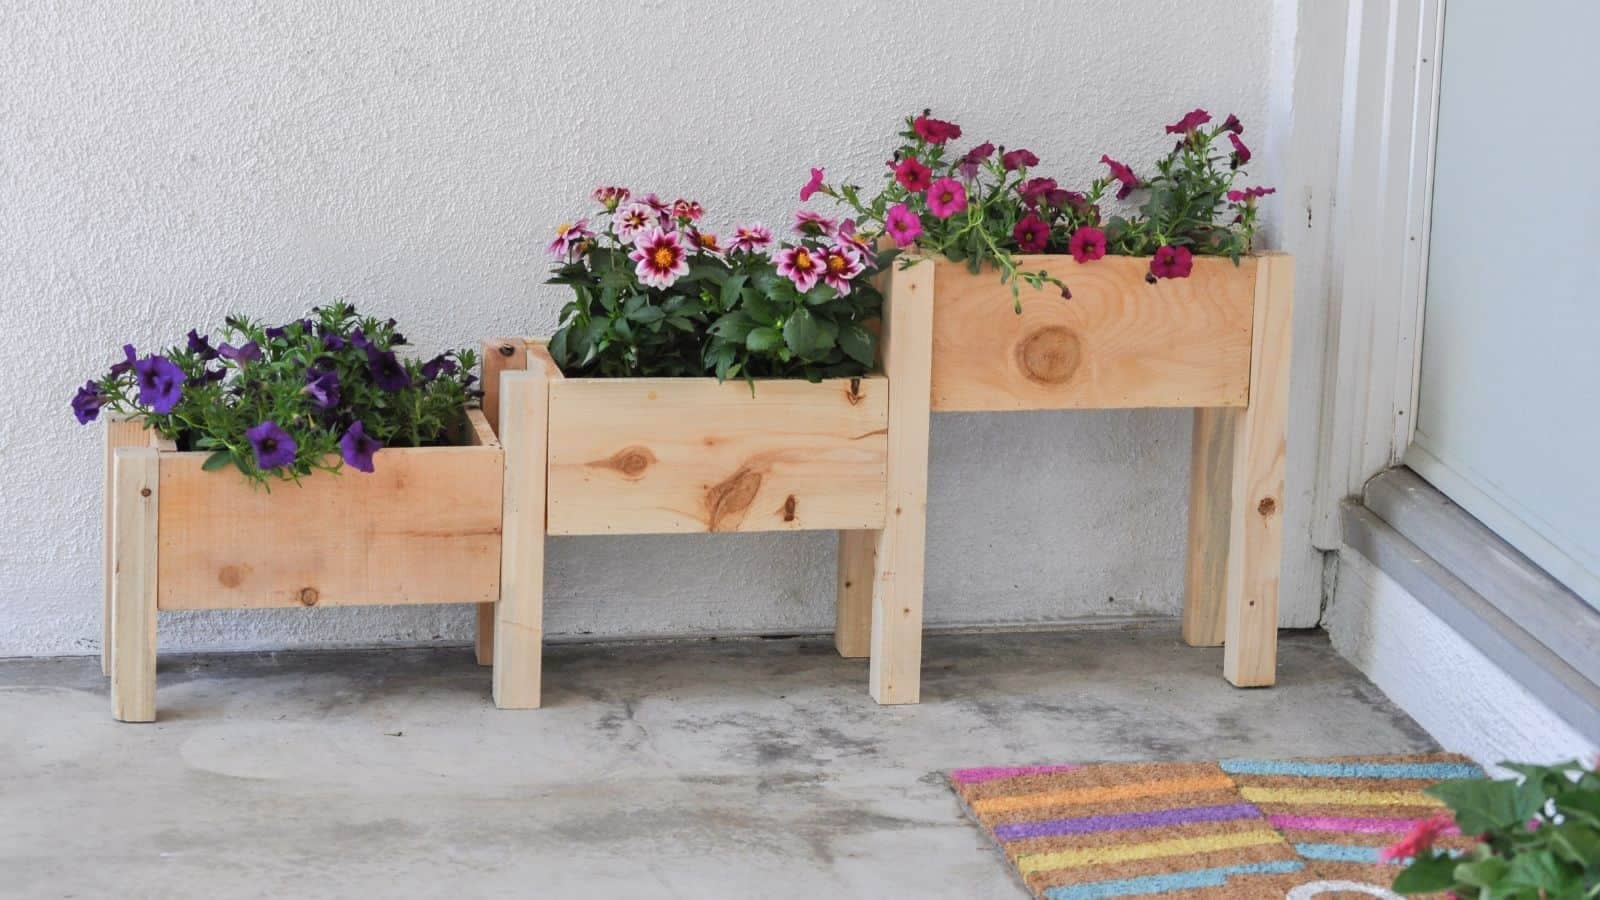 <p>This cute little planter is the perfect project to start your woodworking journey! It’s great to use on a front porch, patio, or deck. Change out the flowers each season for a colorful display. <a href="https://www.anikasdiylife.com/tiered-planter-box-plans-tutorial/">You only need a miter saw and a nail gun to make your own.</a></p>